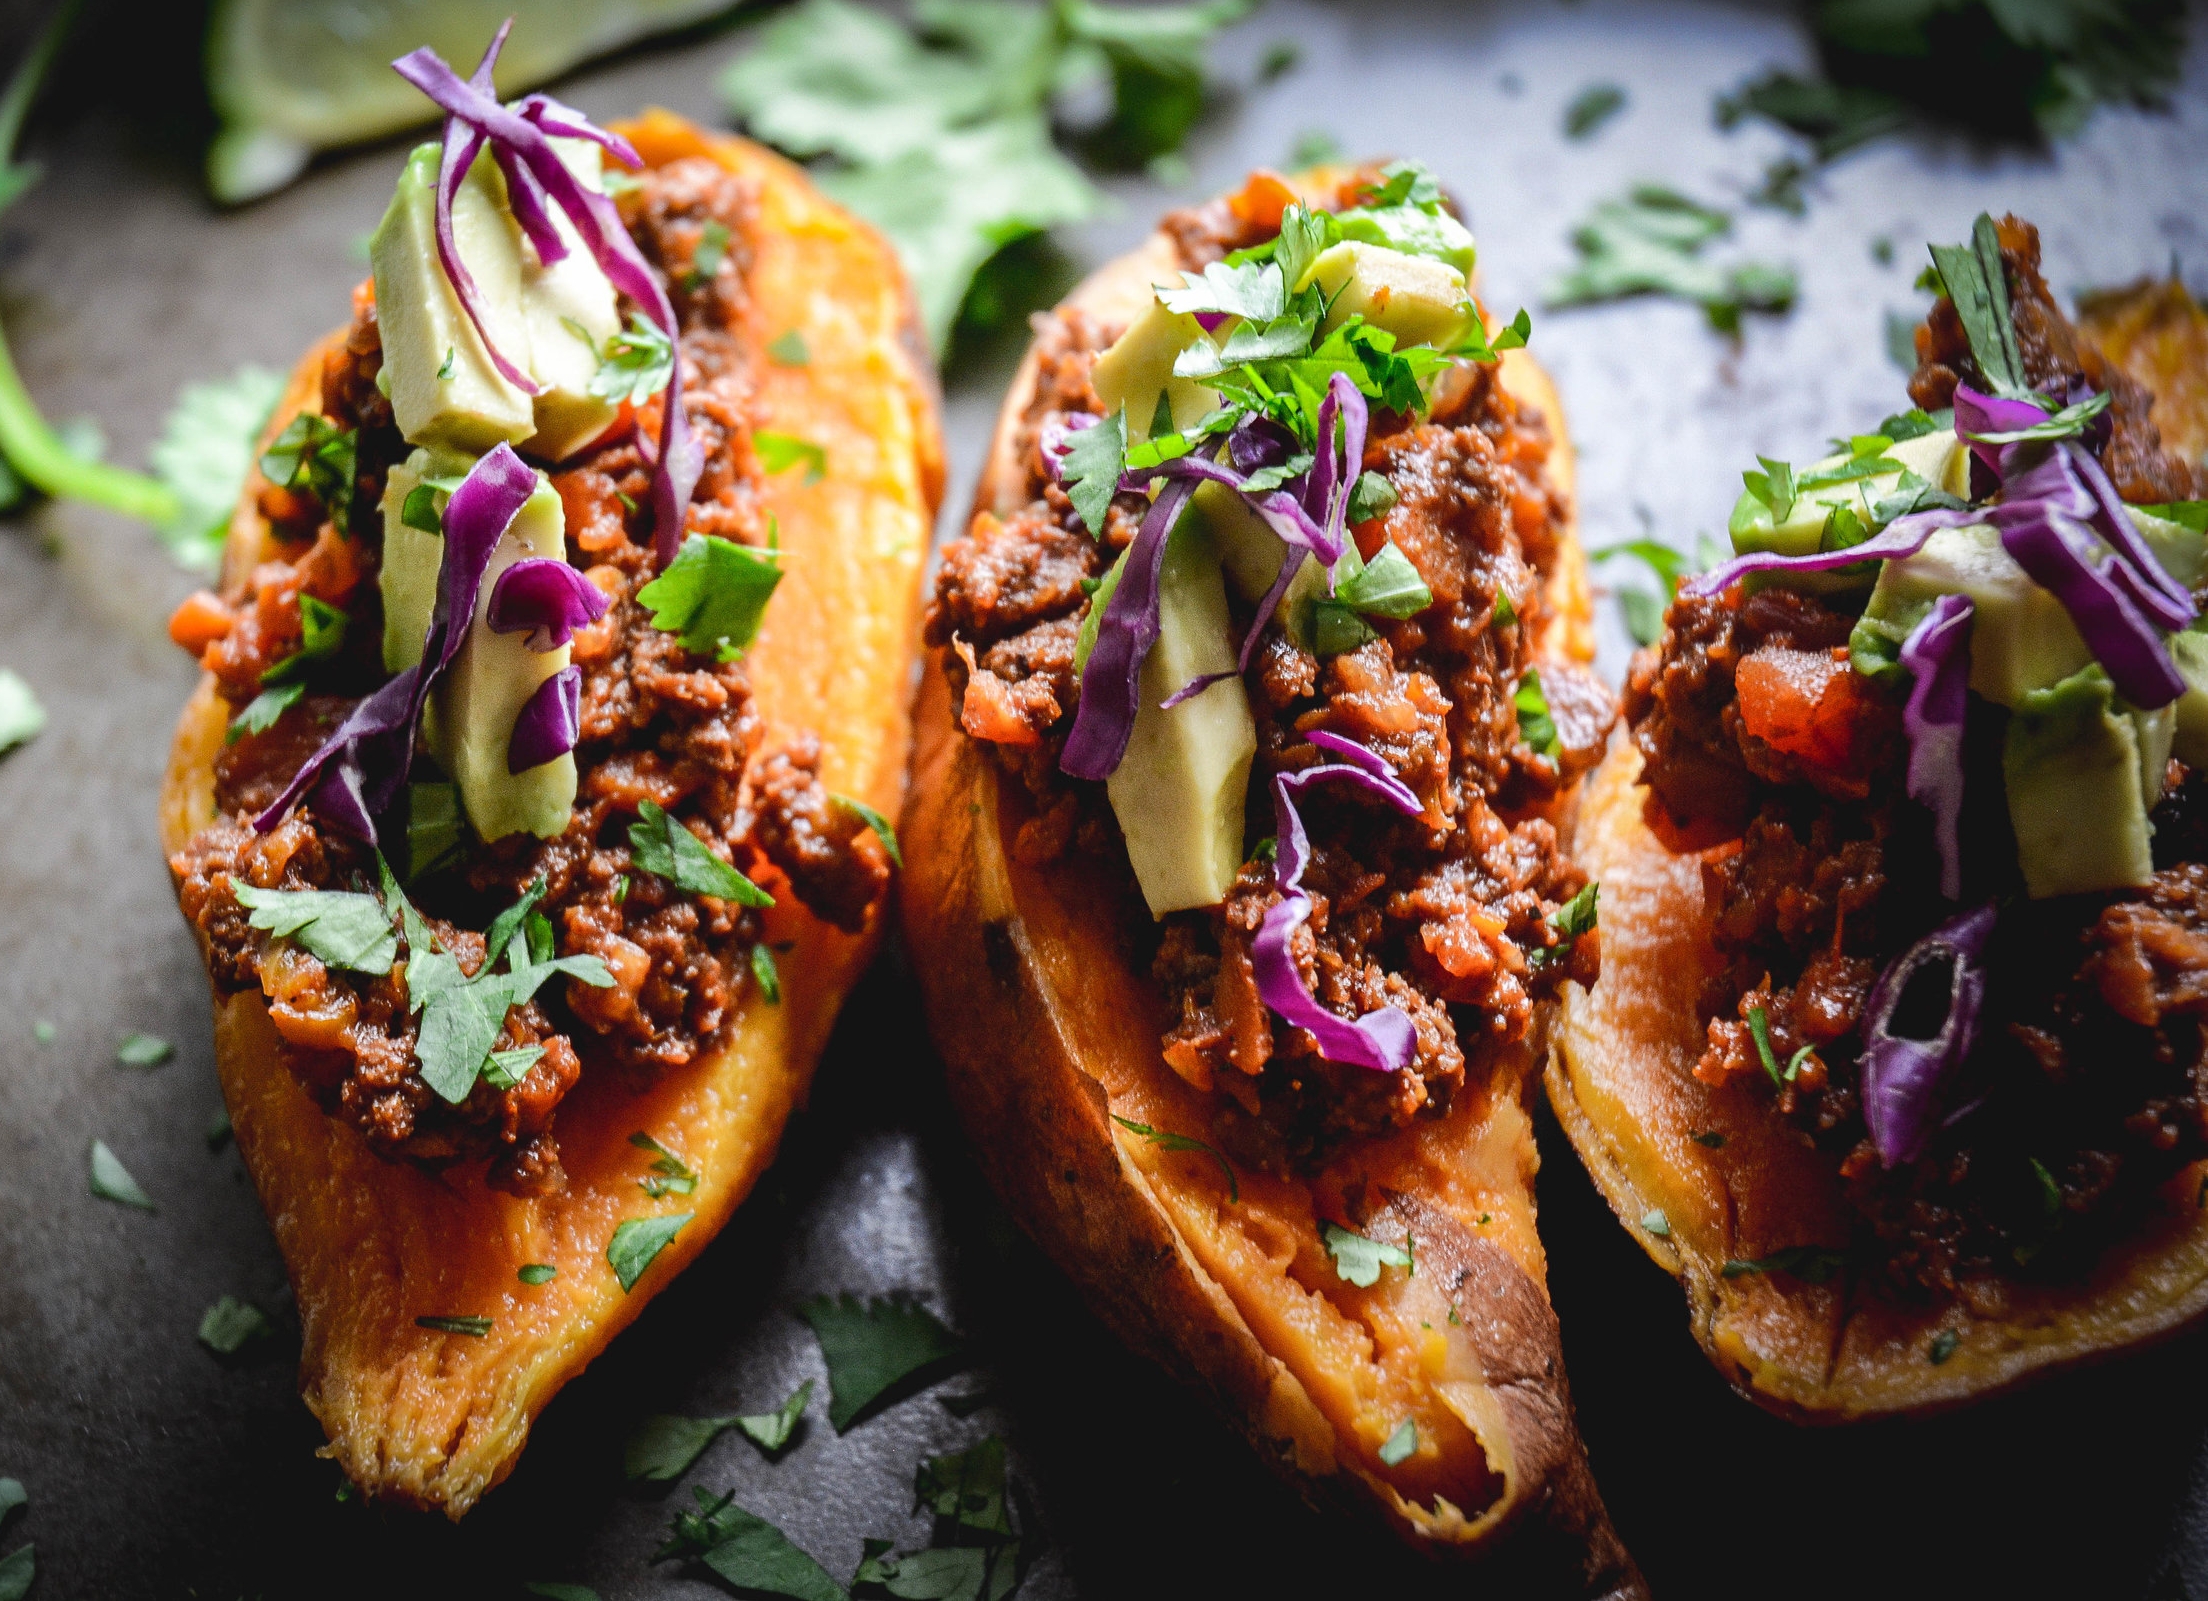  sweet potatoes with cilantro and stuffed with chili 